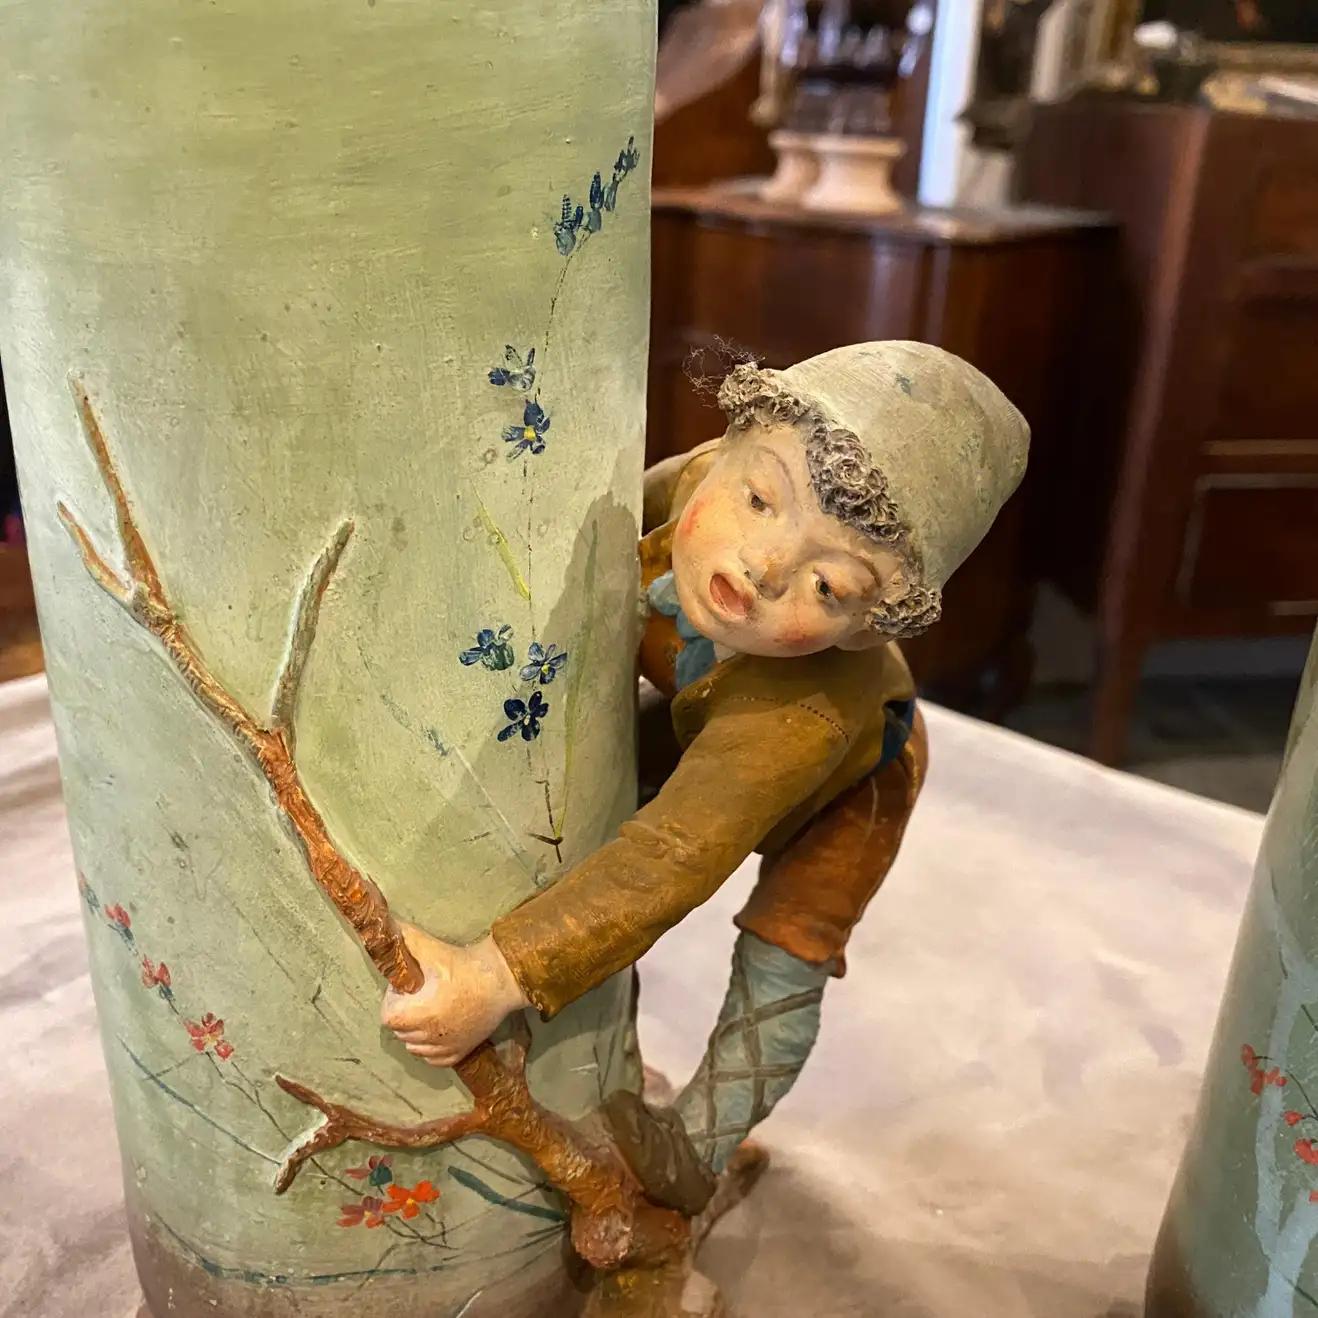 Two rare Art Nouveau ceramic vases made in Italy in 1900. They depicting two children playing. Signs of use and age visible on the photos.